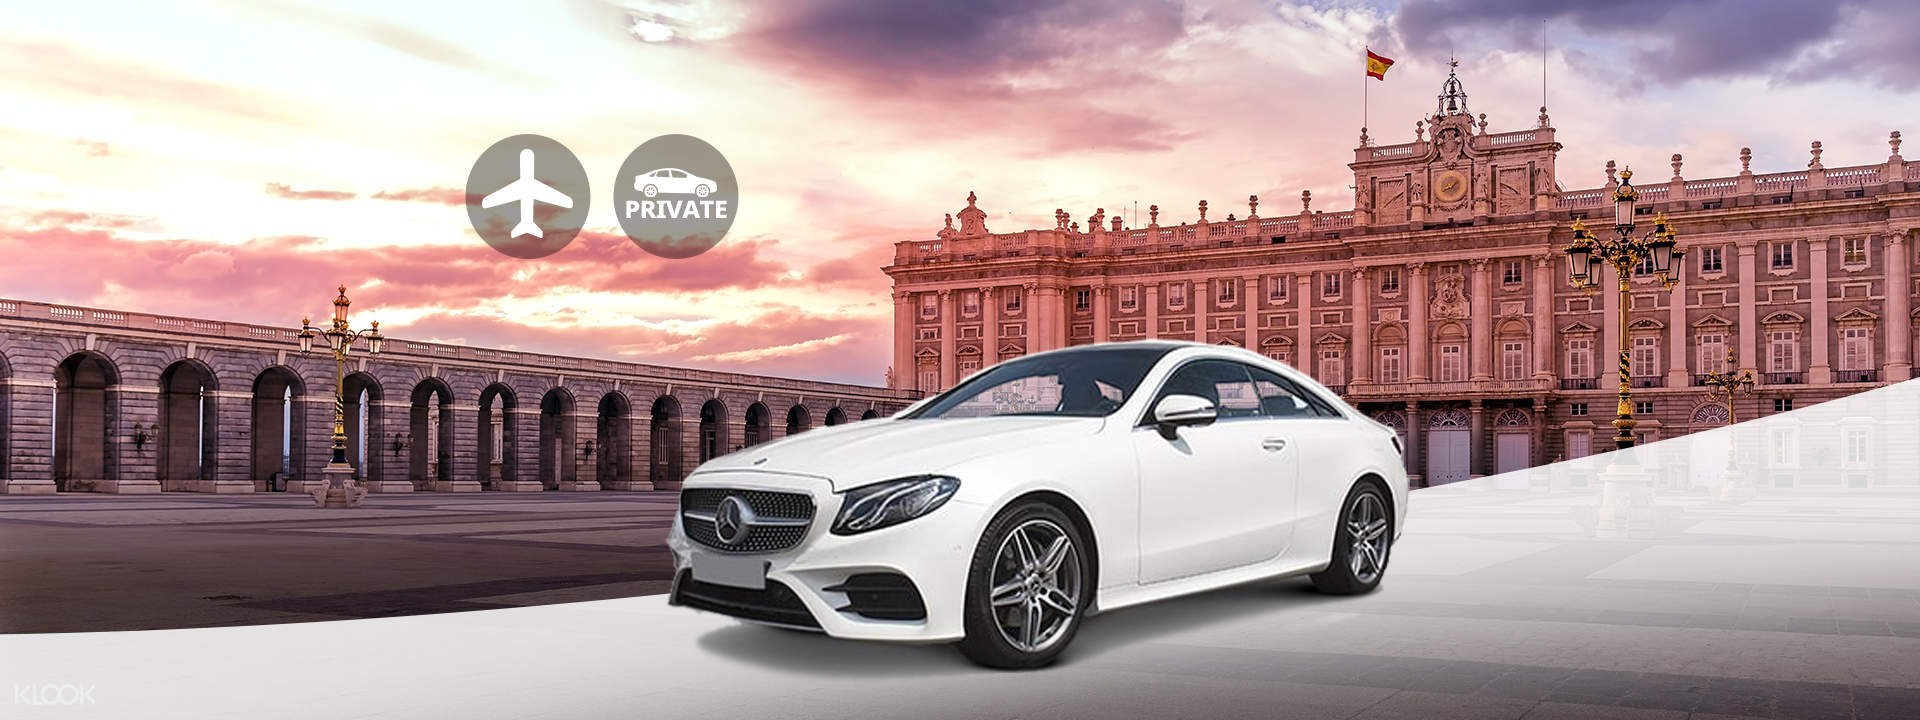 madrid airport transfer to city center